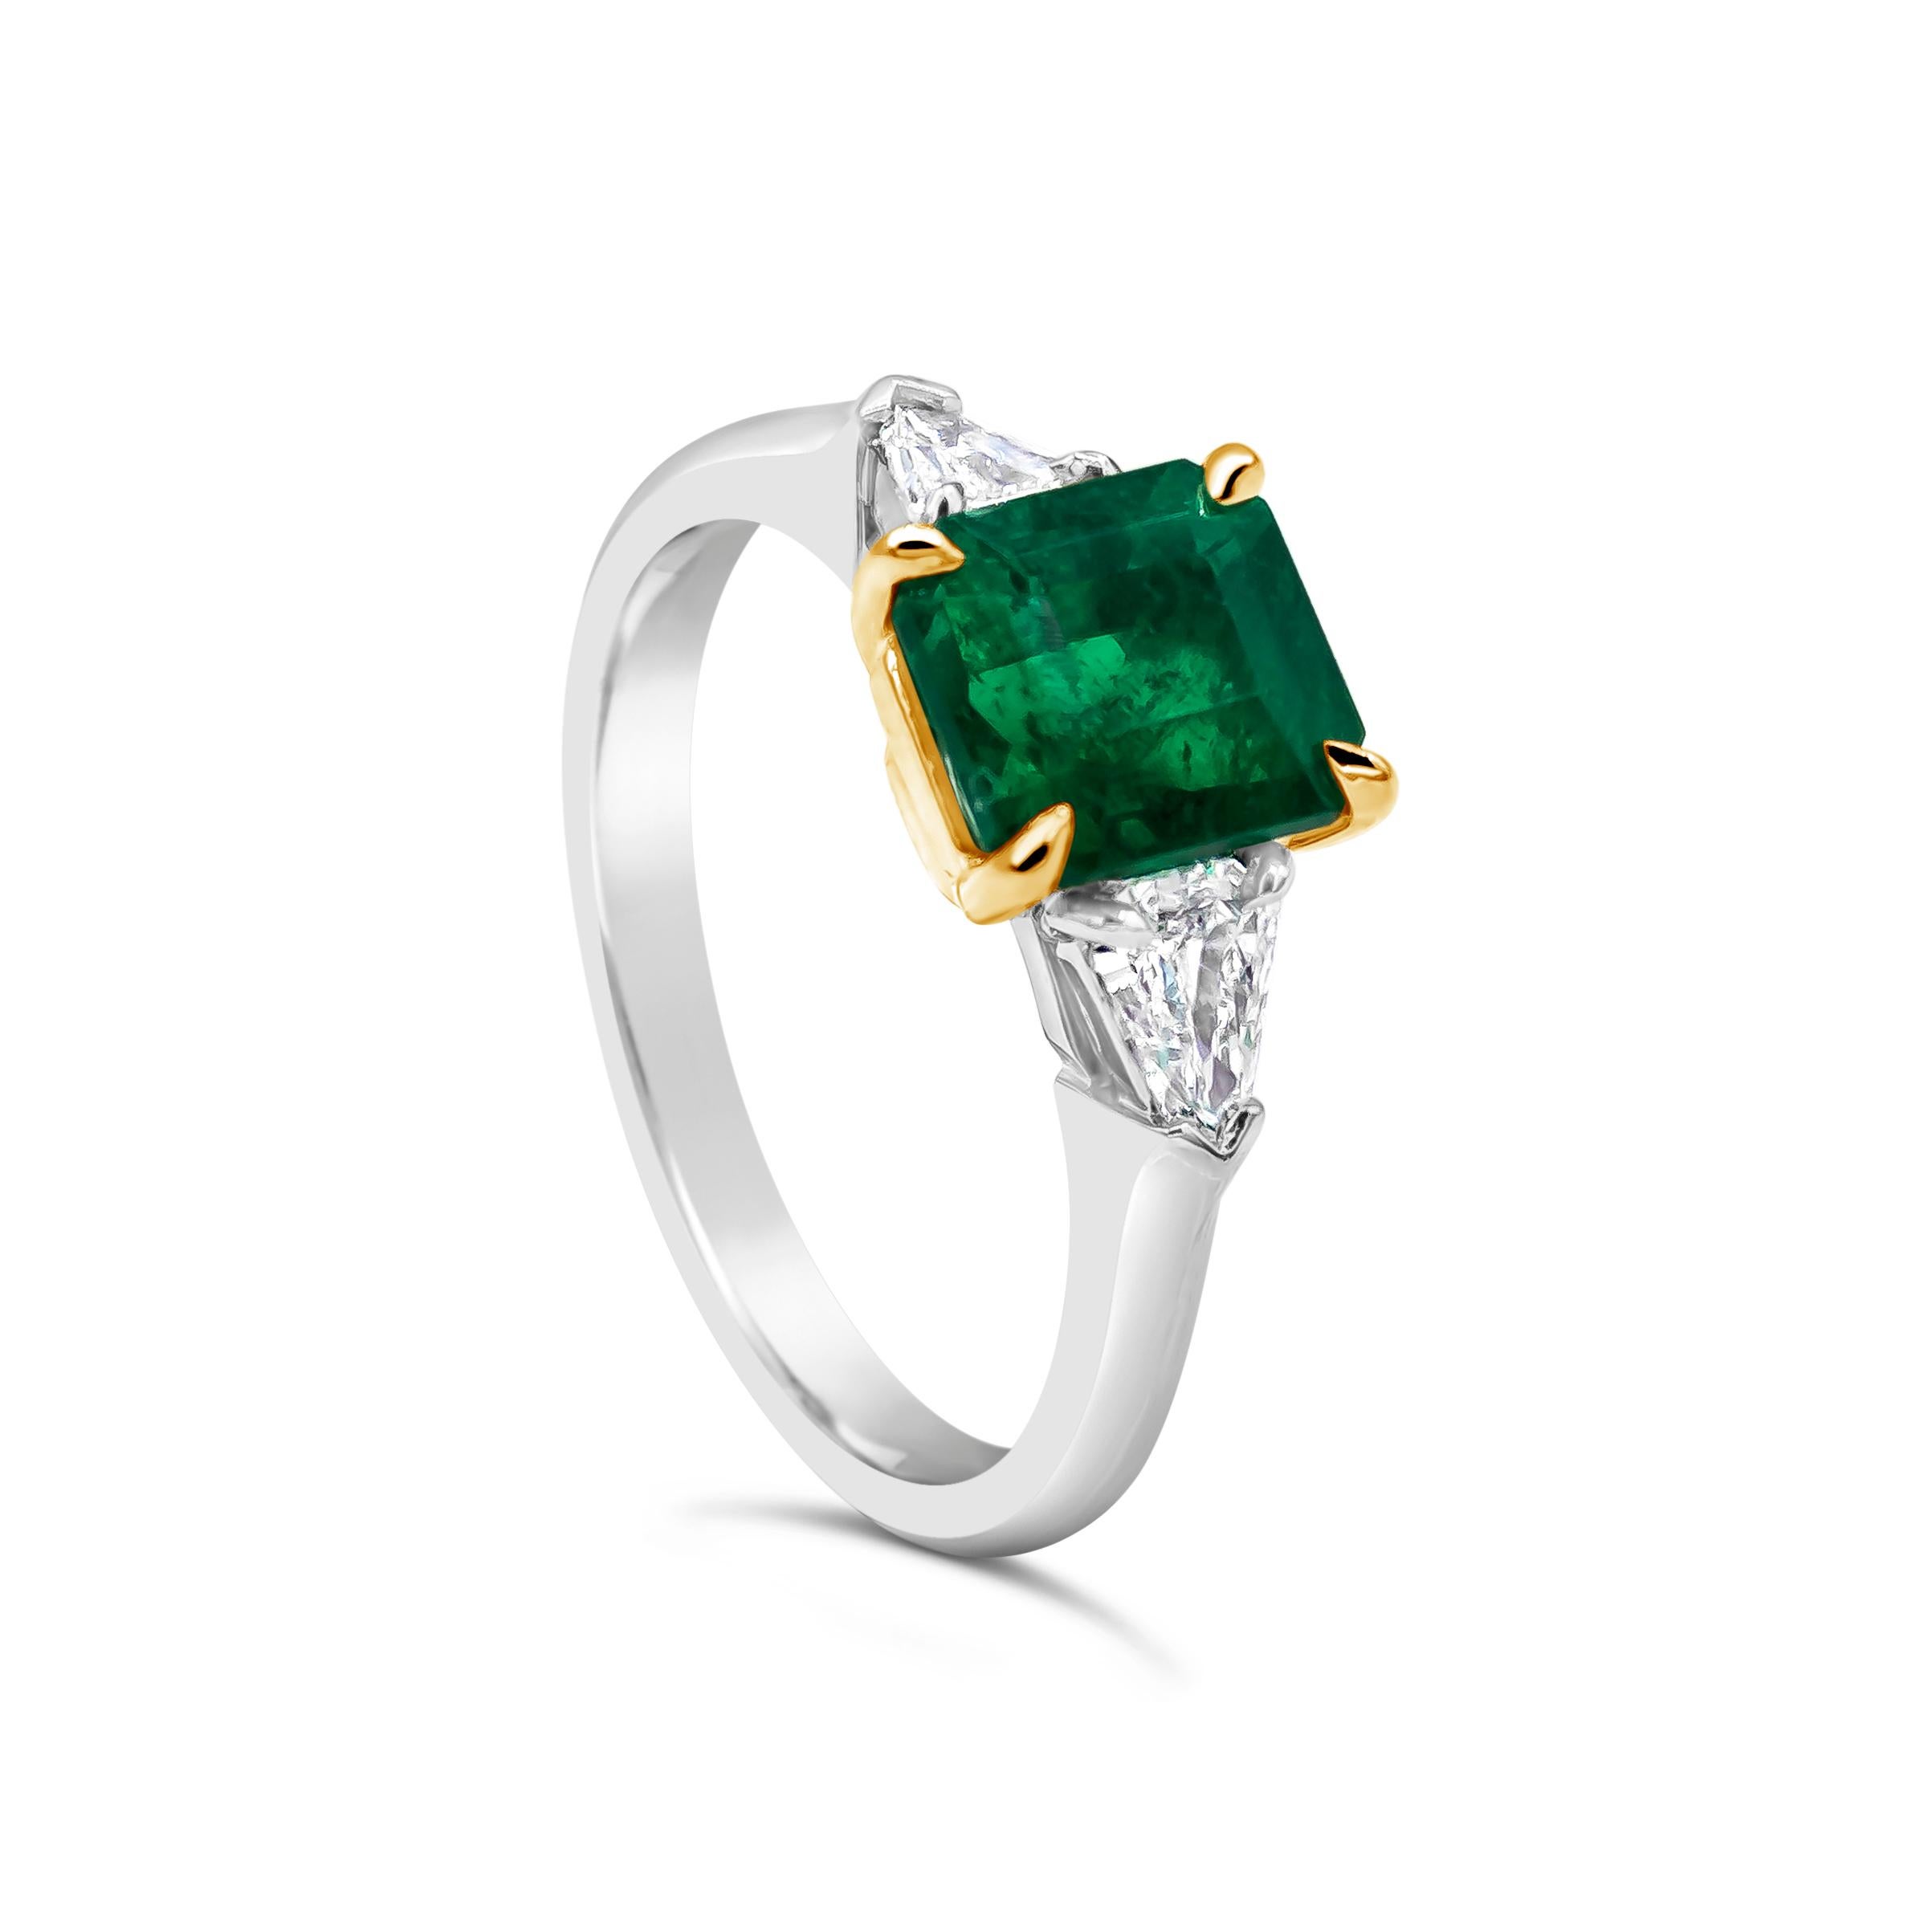 Features a color-rich 1.48 carat Colombian emerald that C. Dunaigre certified as vivid green color, with minor treatment. The emerald is flanked by two bullet shape diamonds in a polished platinum mounting.

Style available in different price